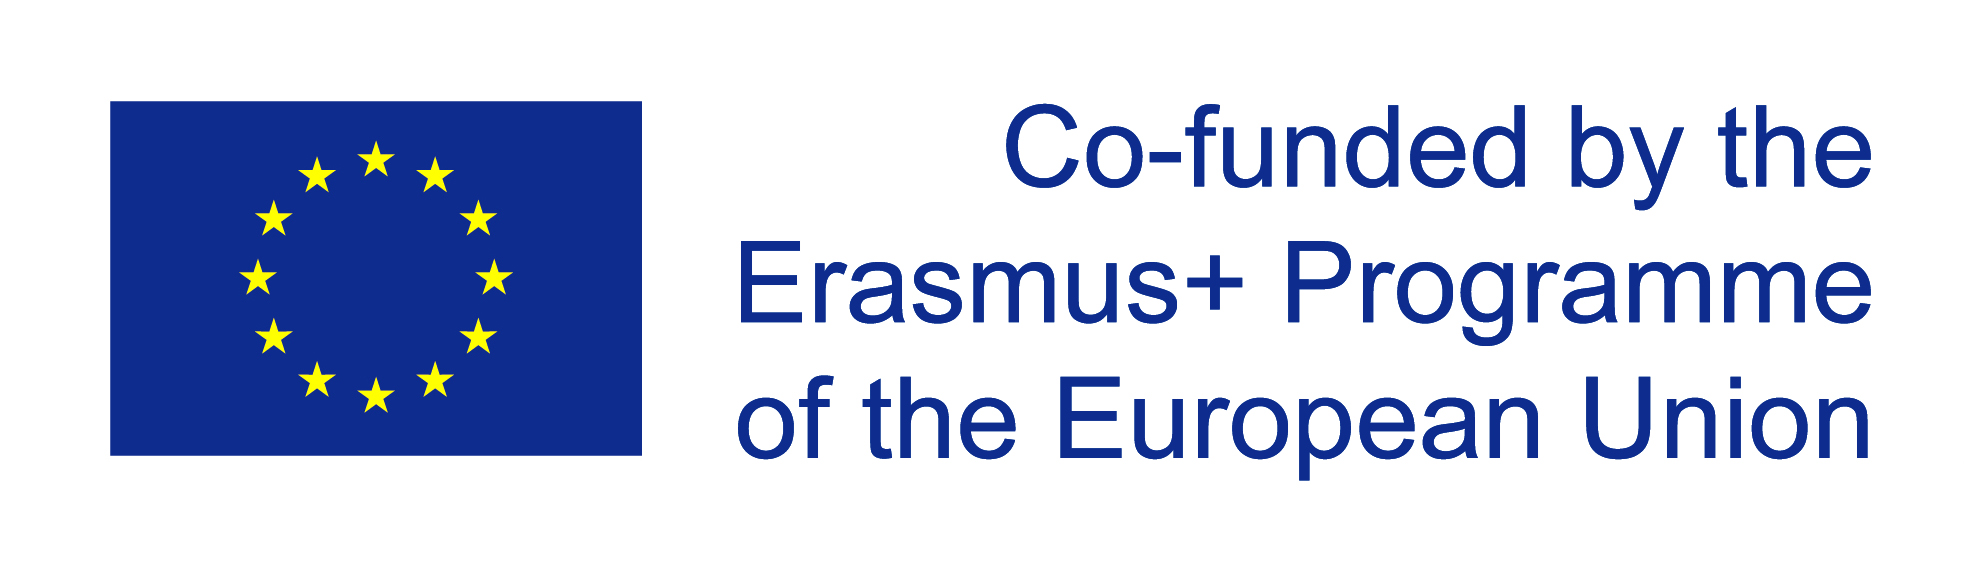 Co-funded by the Erasmus+ Programme of the European Union.